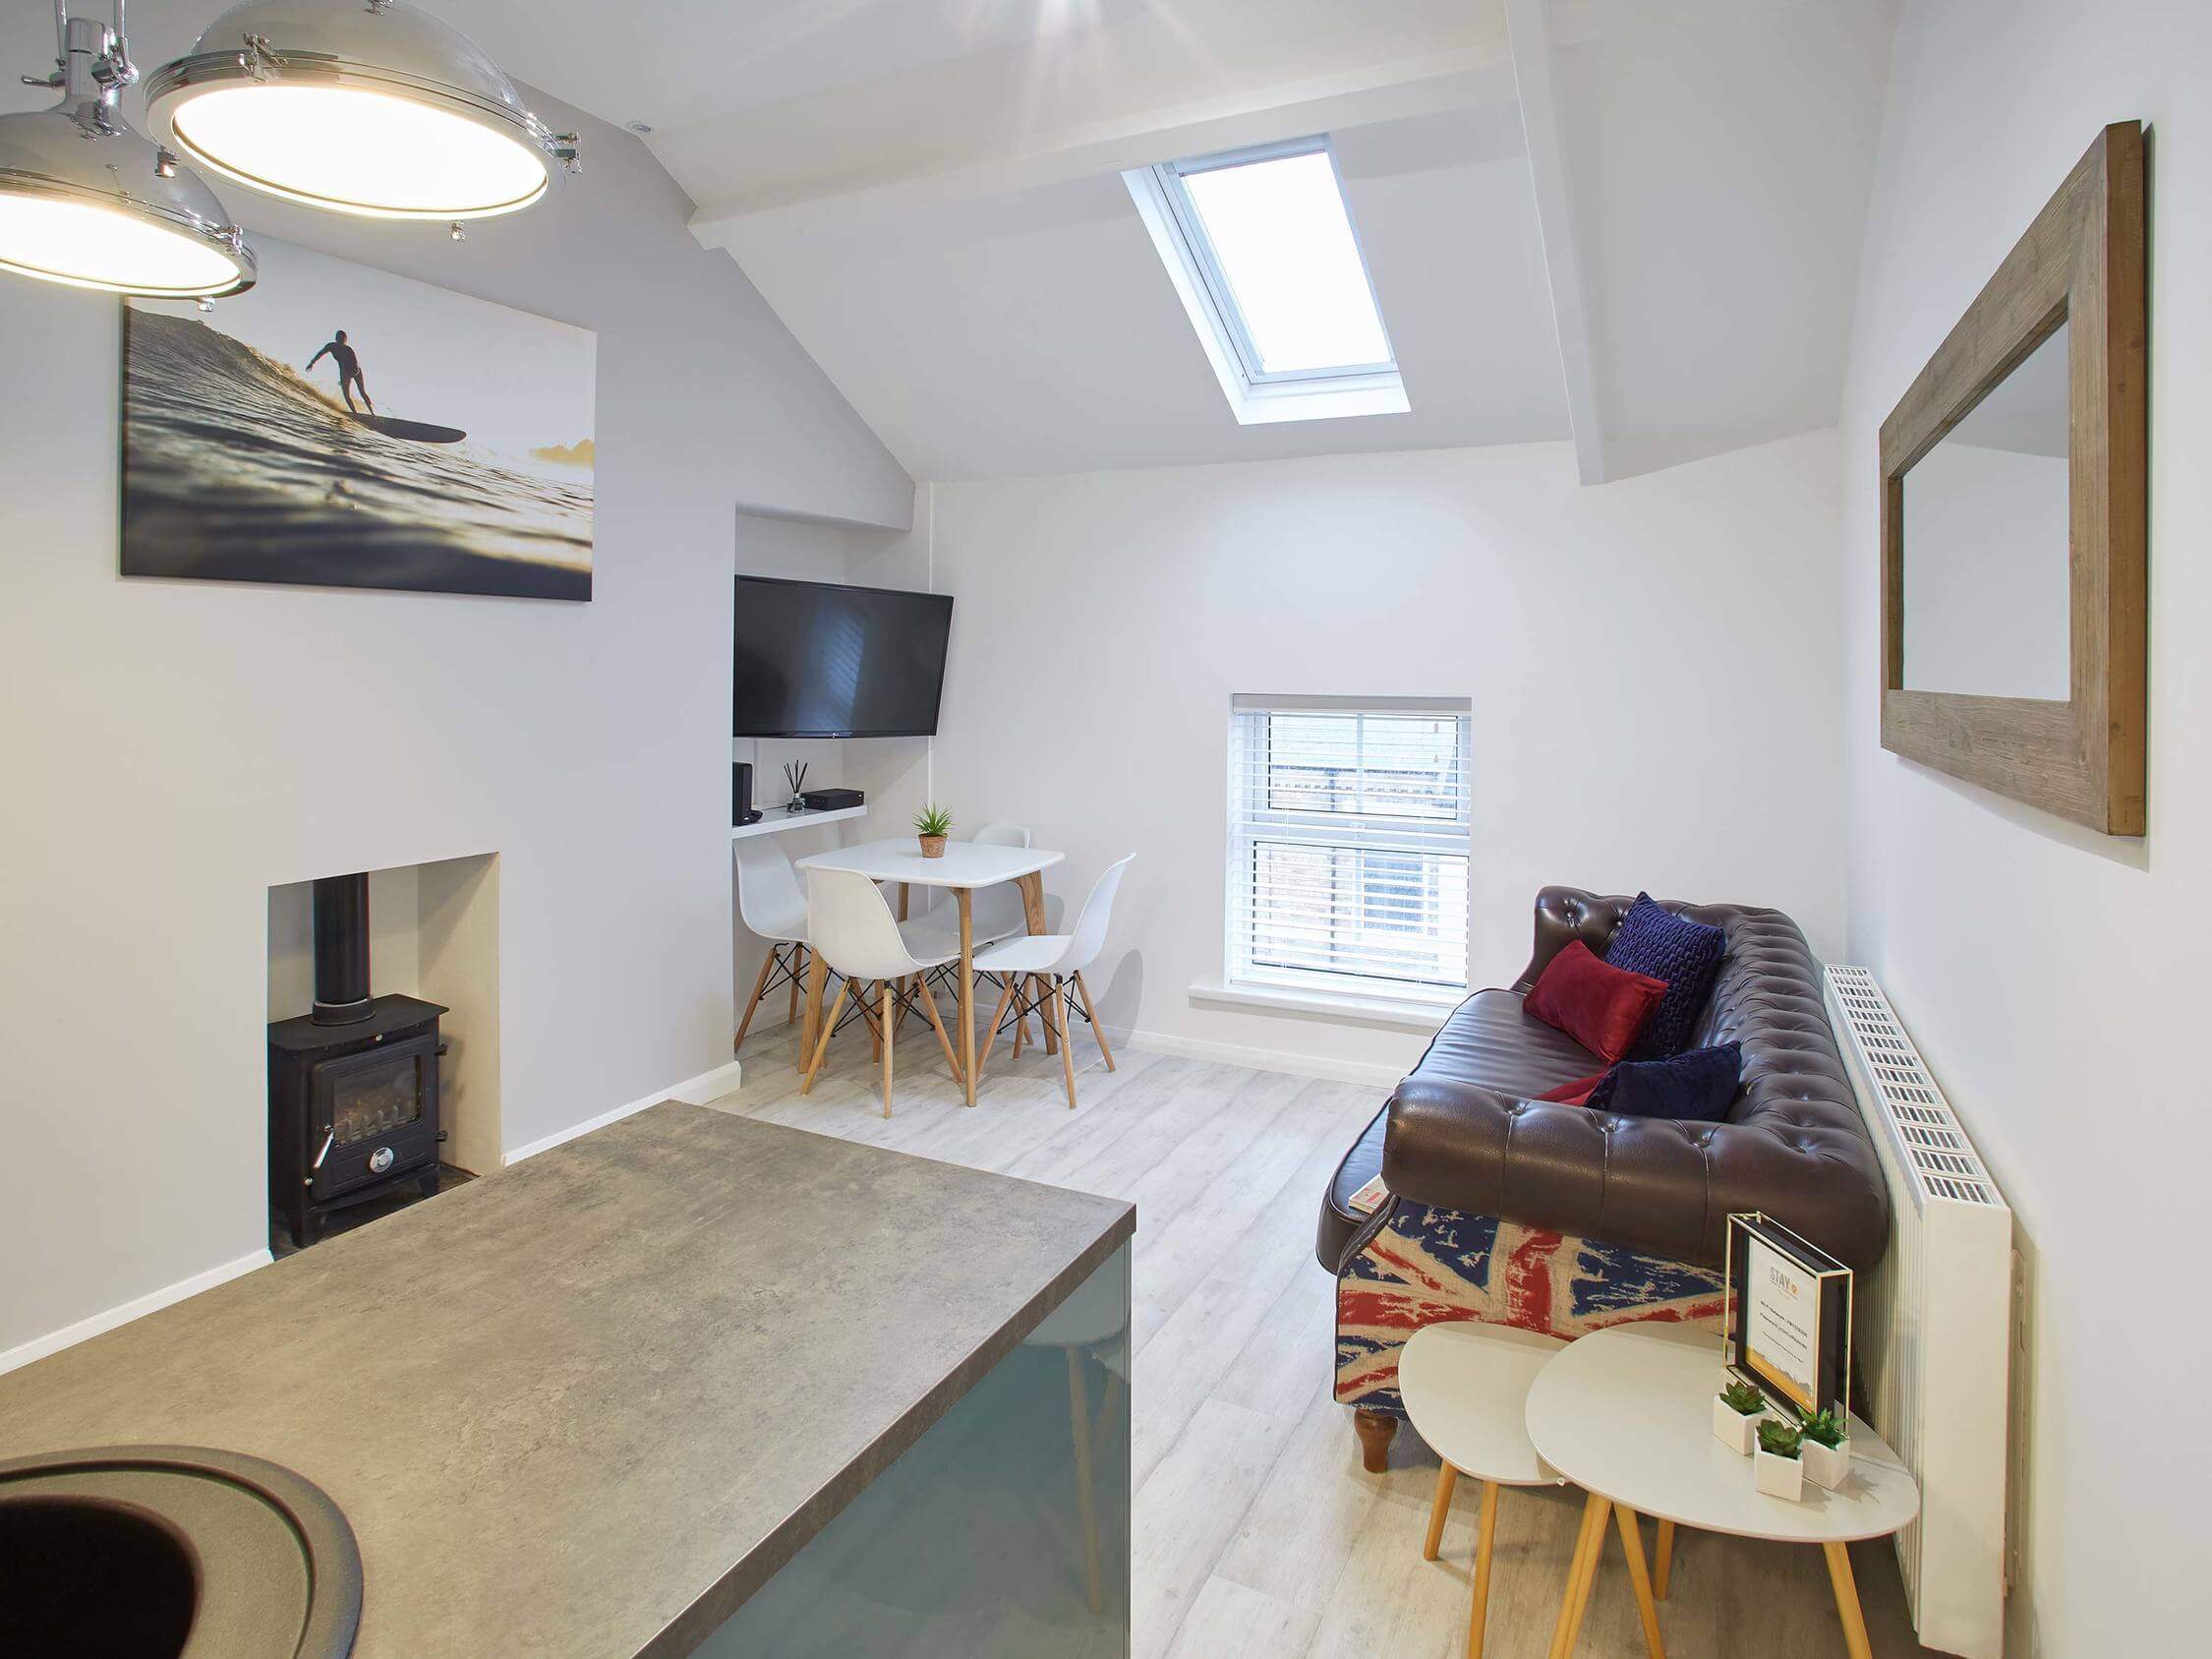 The Surfer's Loft Apartment in Saltburn-by-the-Sea